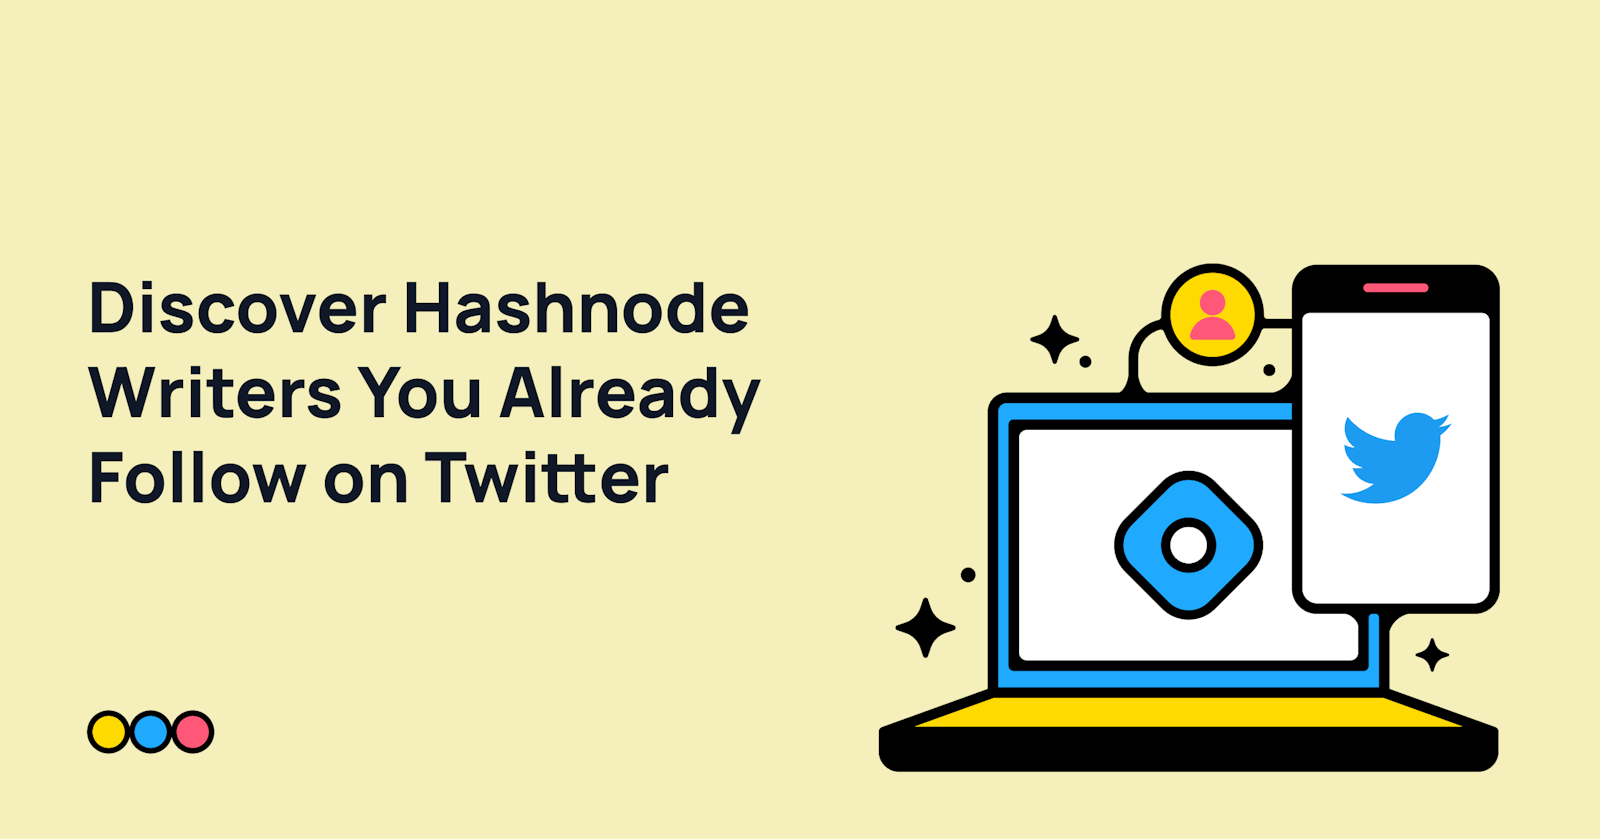 Discover Hashnode Writers You Already Follow on Twitter 🐦